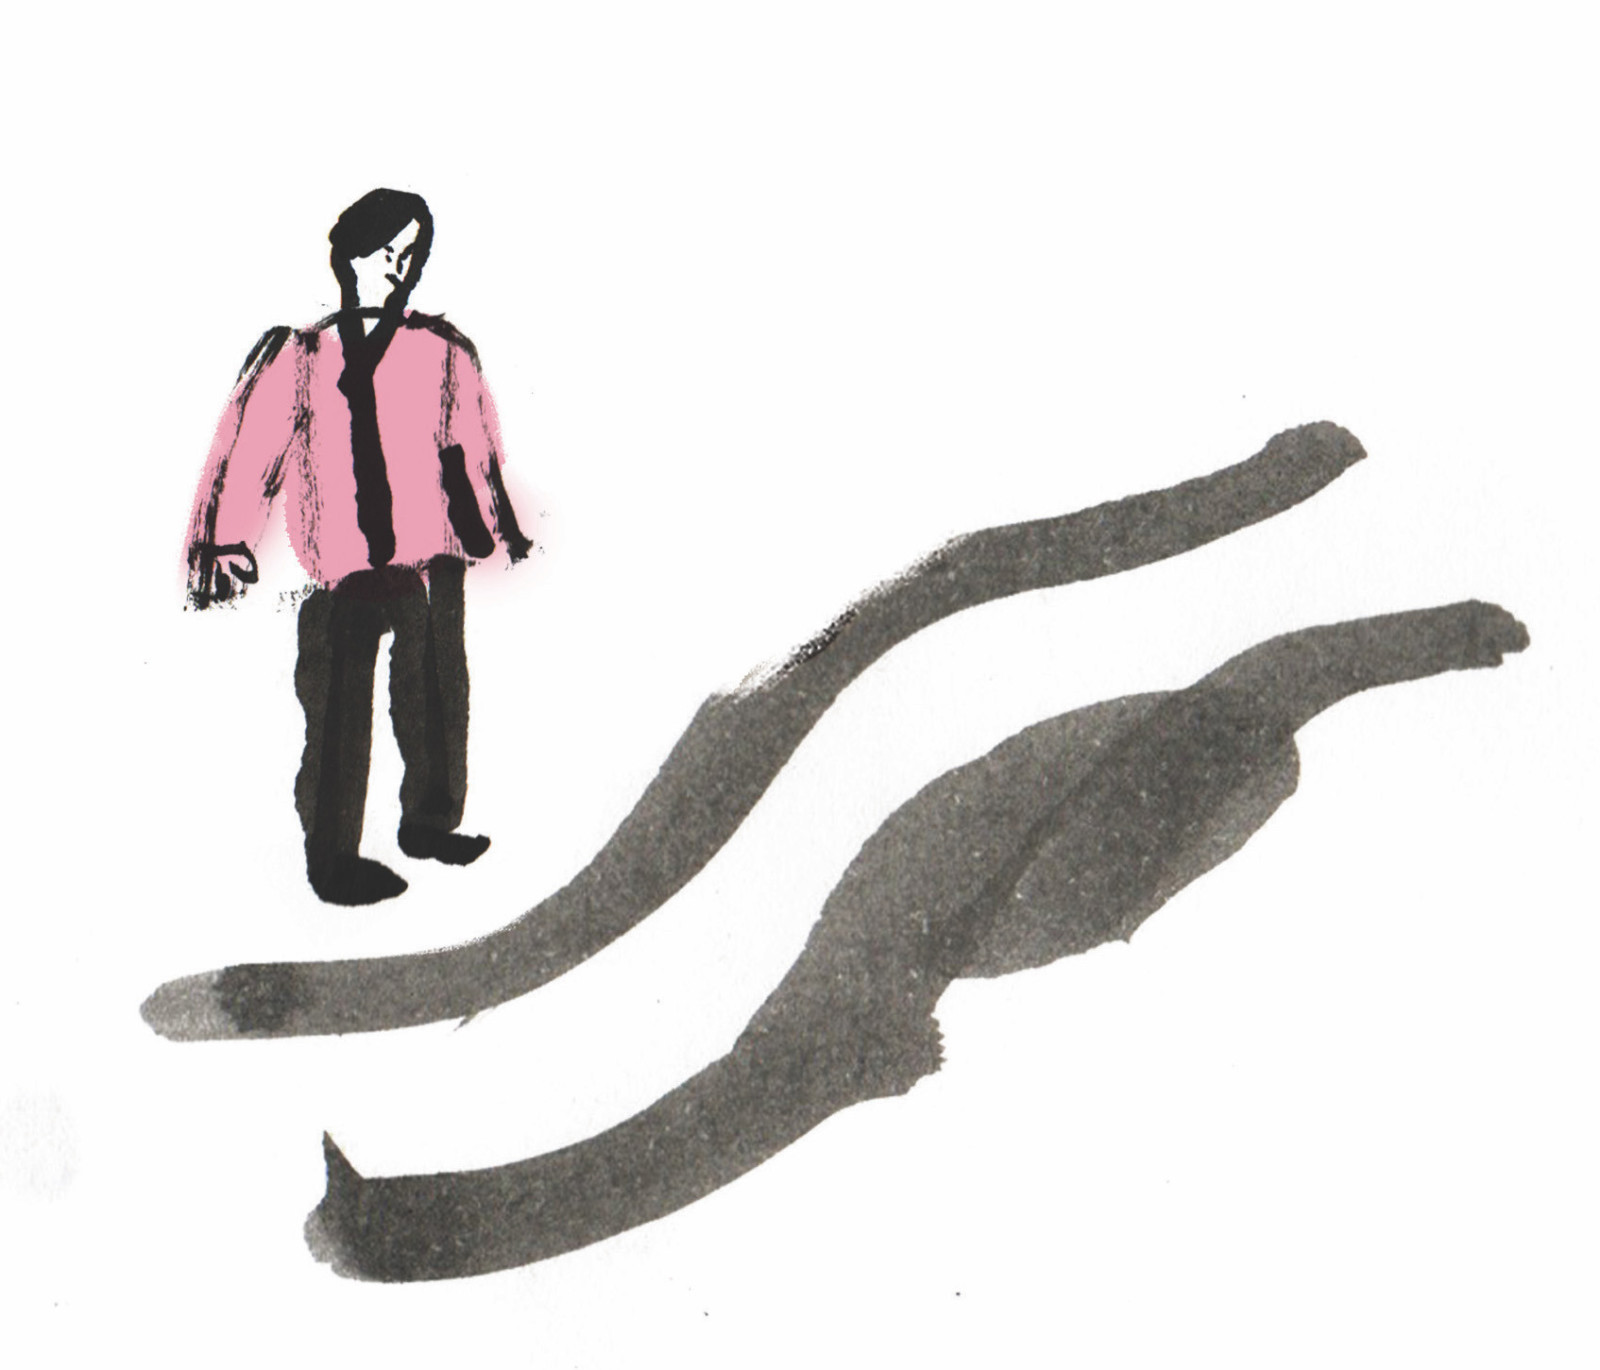 A drawing of a person with a pink jacket stands by a path.